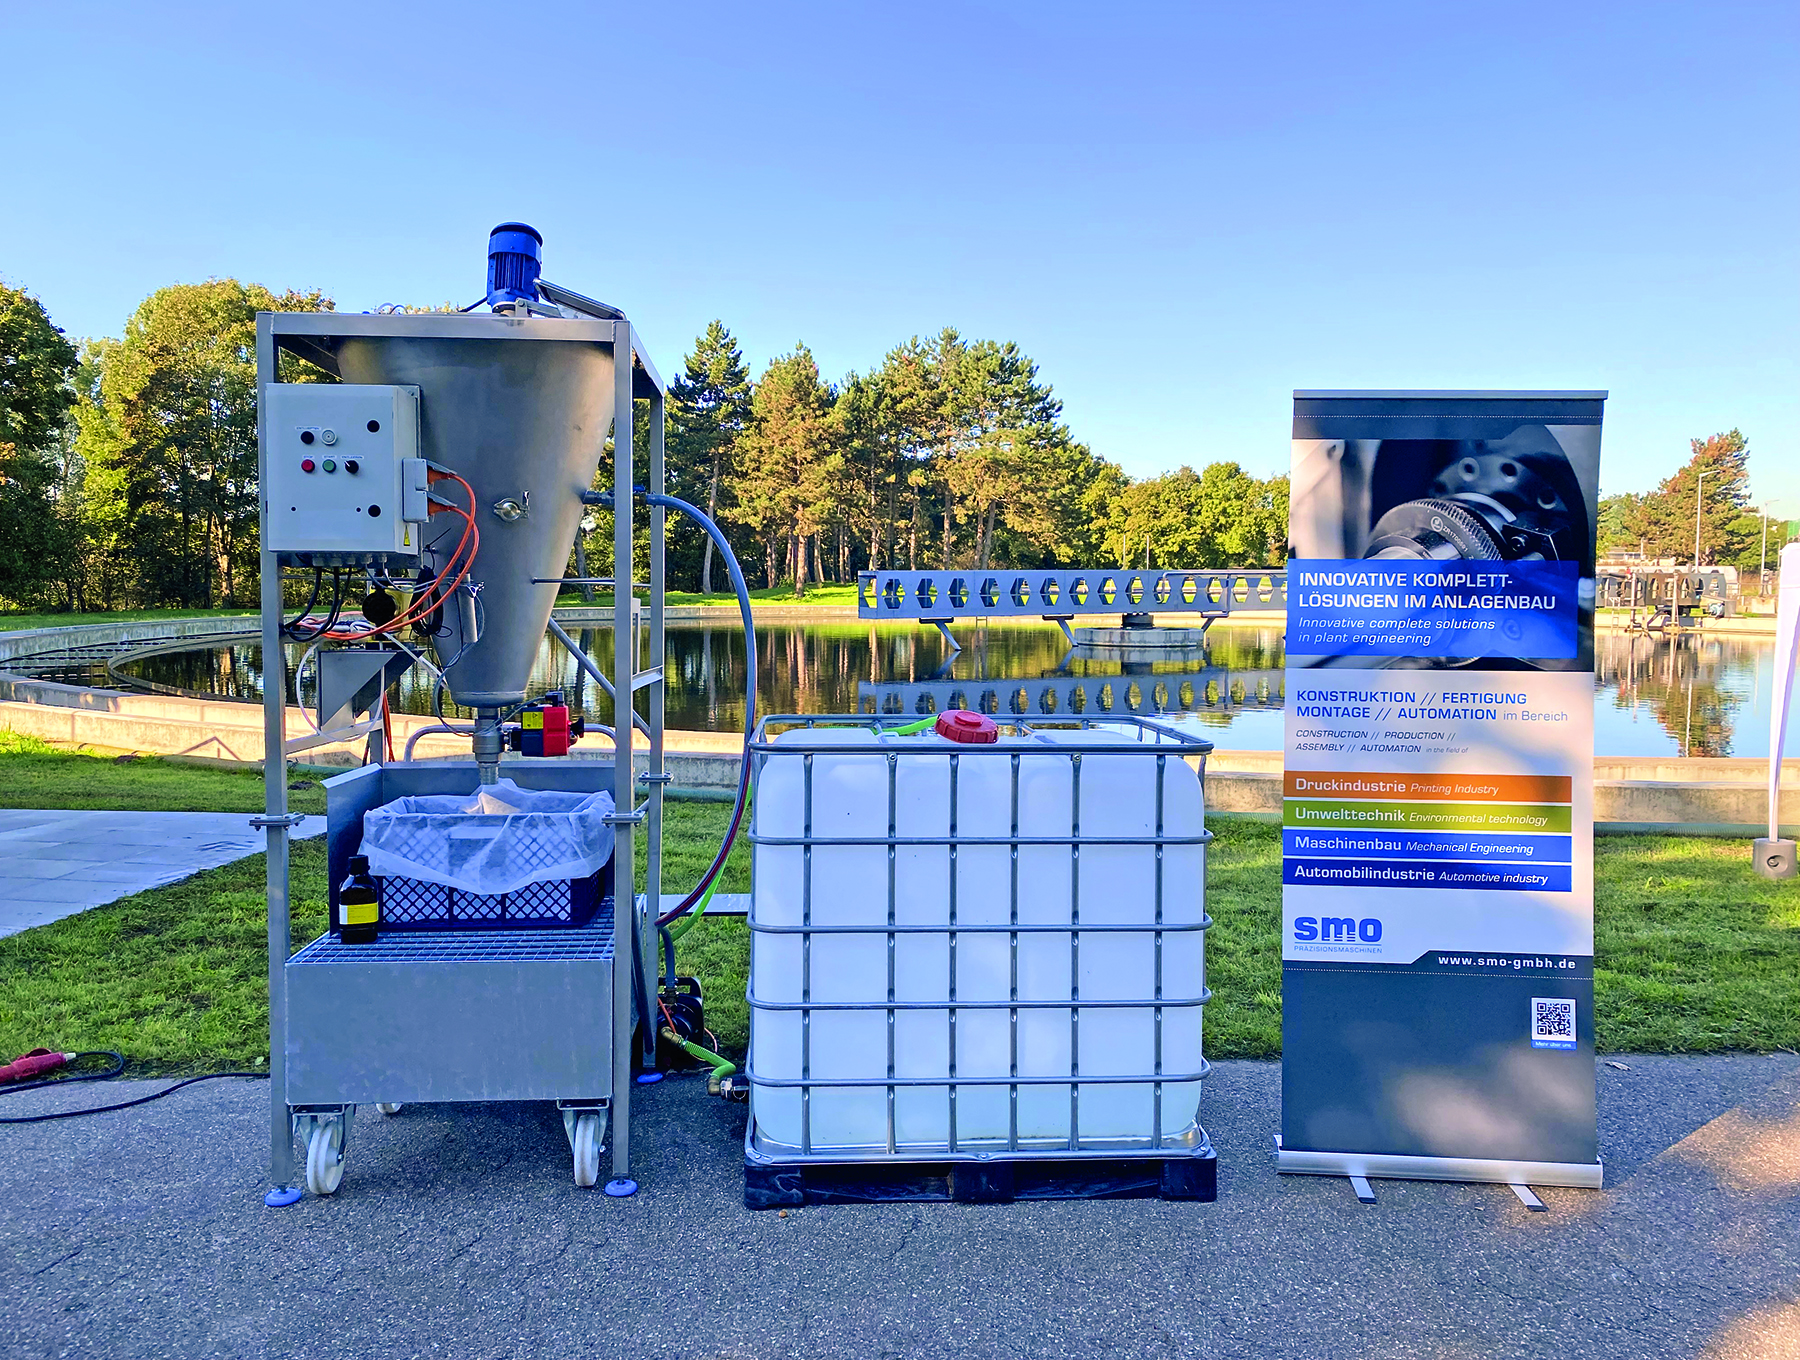 Presentation of a system for removing microplastics from water at the Wasser 3.0 Open House